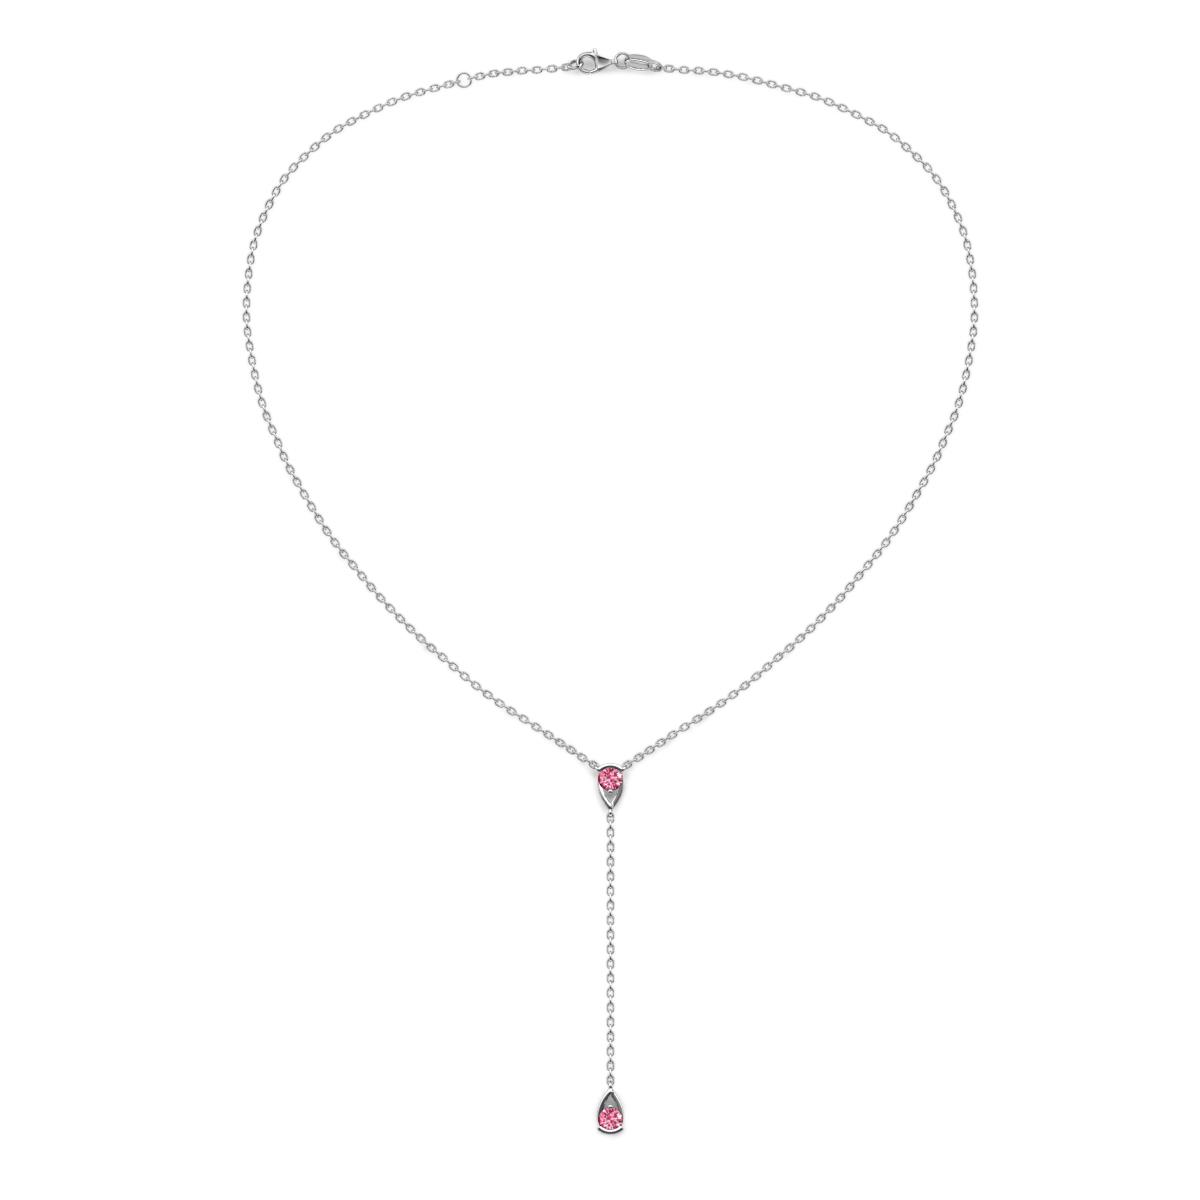 Twila ctw Pink Tourmaline Women Lariat Necklace ctw Pink Tourmaline Women Lariat Necklace in K White GoldIncluded inches K White Gold Chain